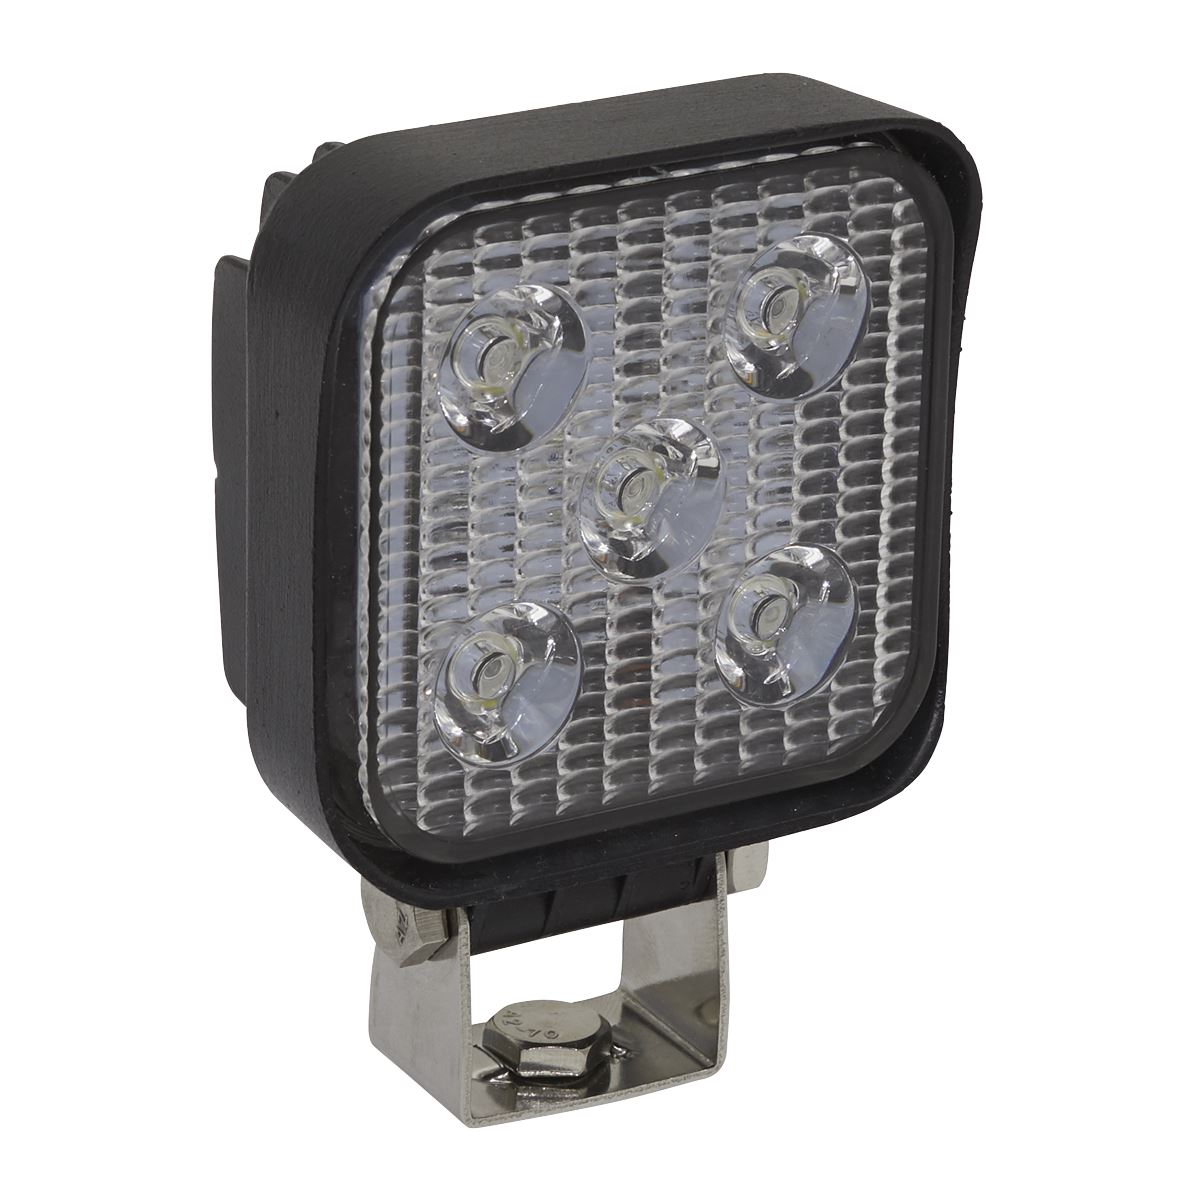 Sealey Mini Square Worklight with Mounting Bracket 15W SMD LED